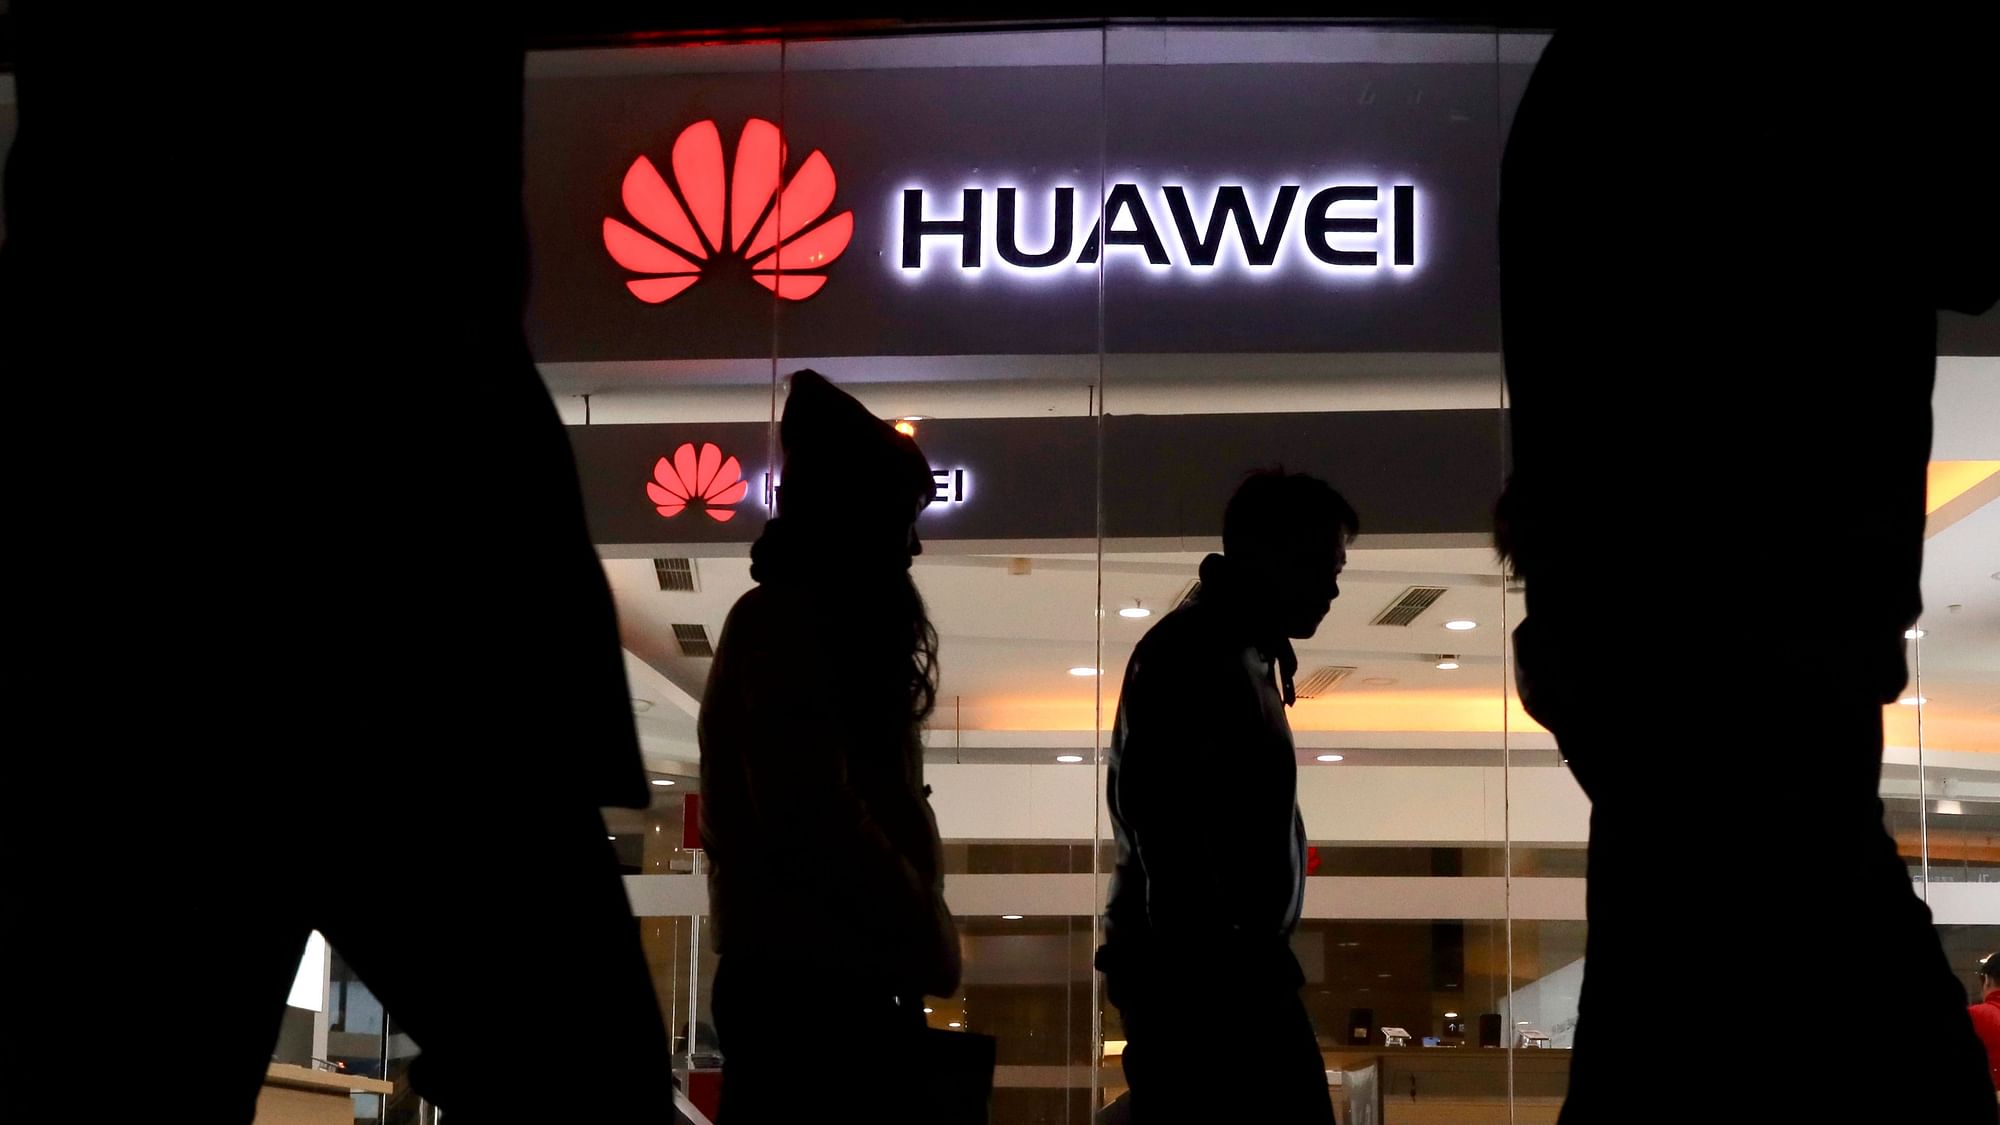 The Wall Street Journal, citing anonymous sources, said the Justice Department is looking into allegations of theft of trade secrets from Huawei’s US business partners, including a T-Mobile robotic device used to test smartphones.